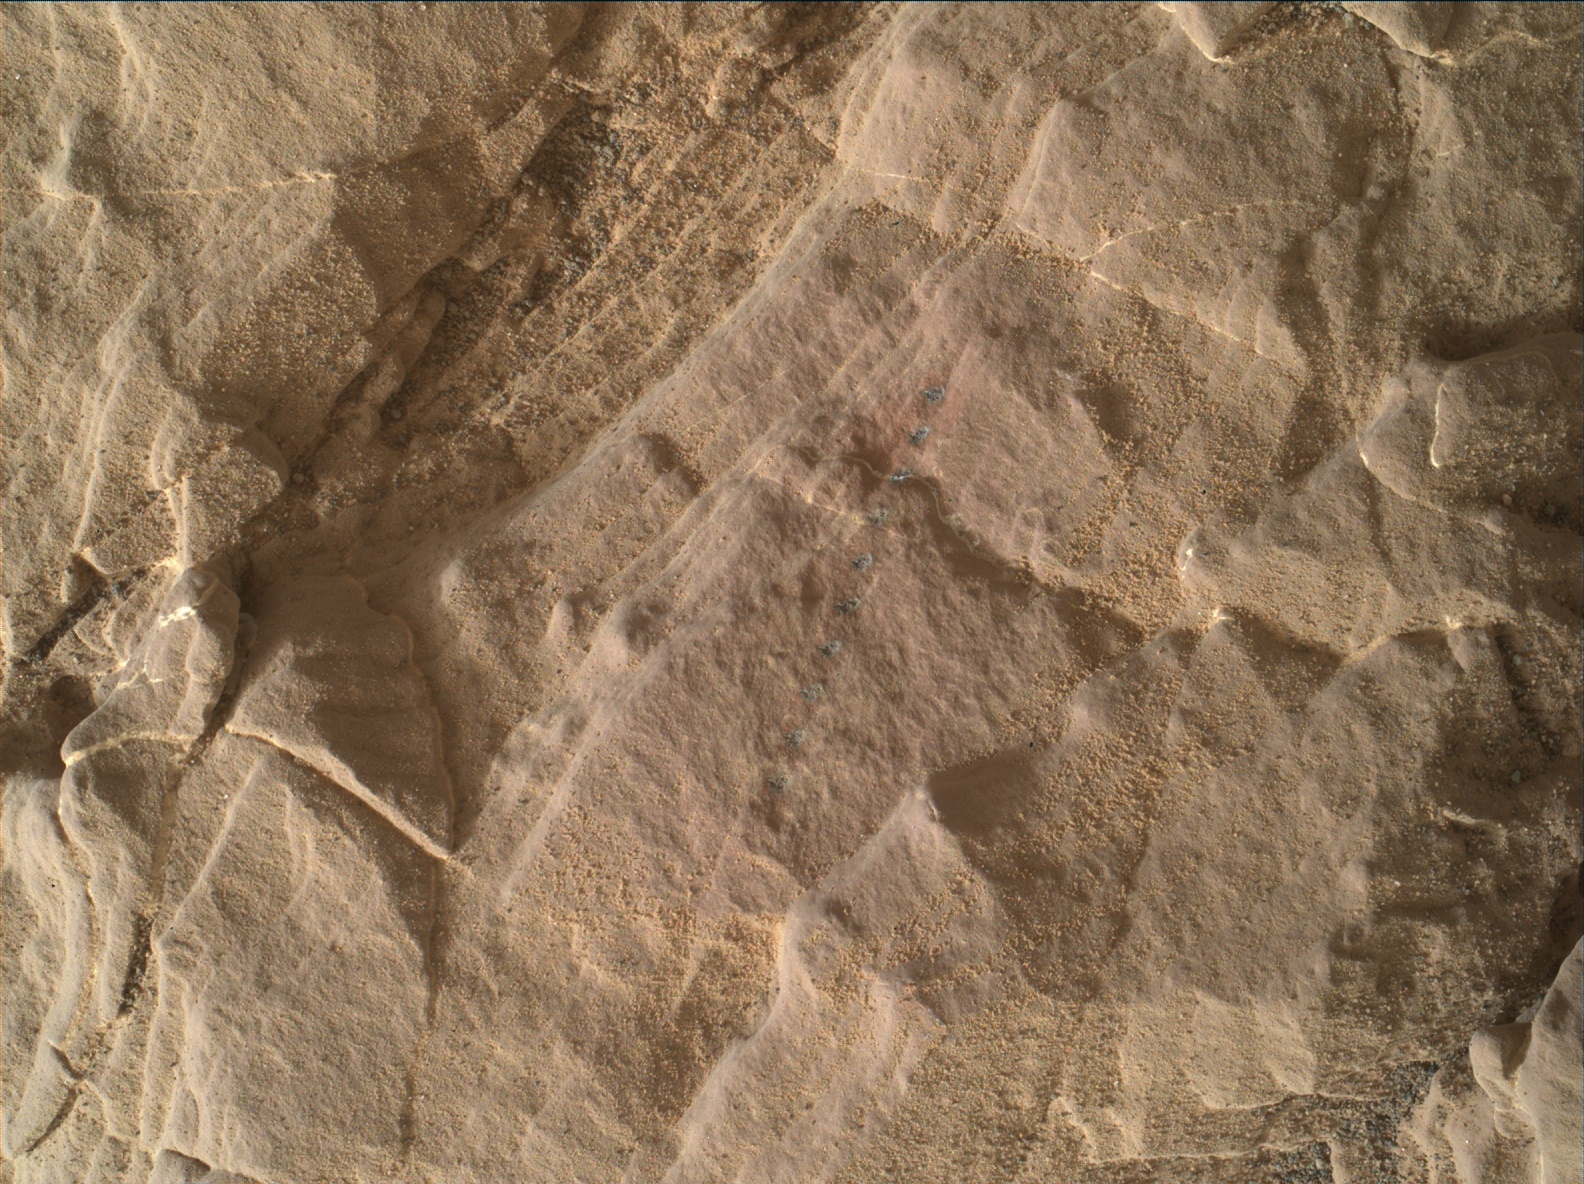 Nasa's Mars rover Curiosity acquired this image using its Mars Hand Lens Imager (MAHLI) on Sol 1852